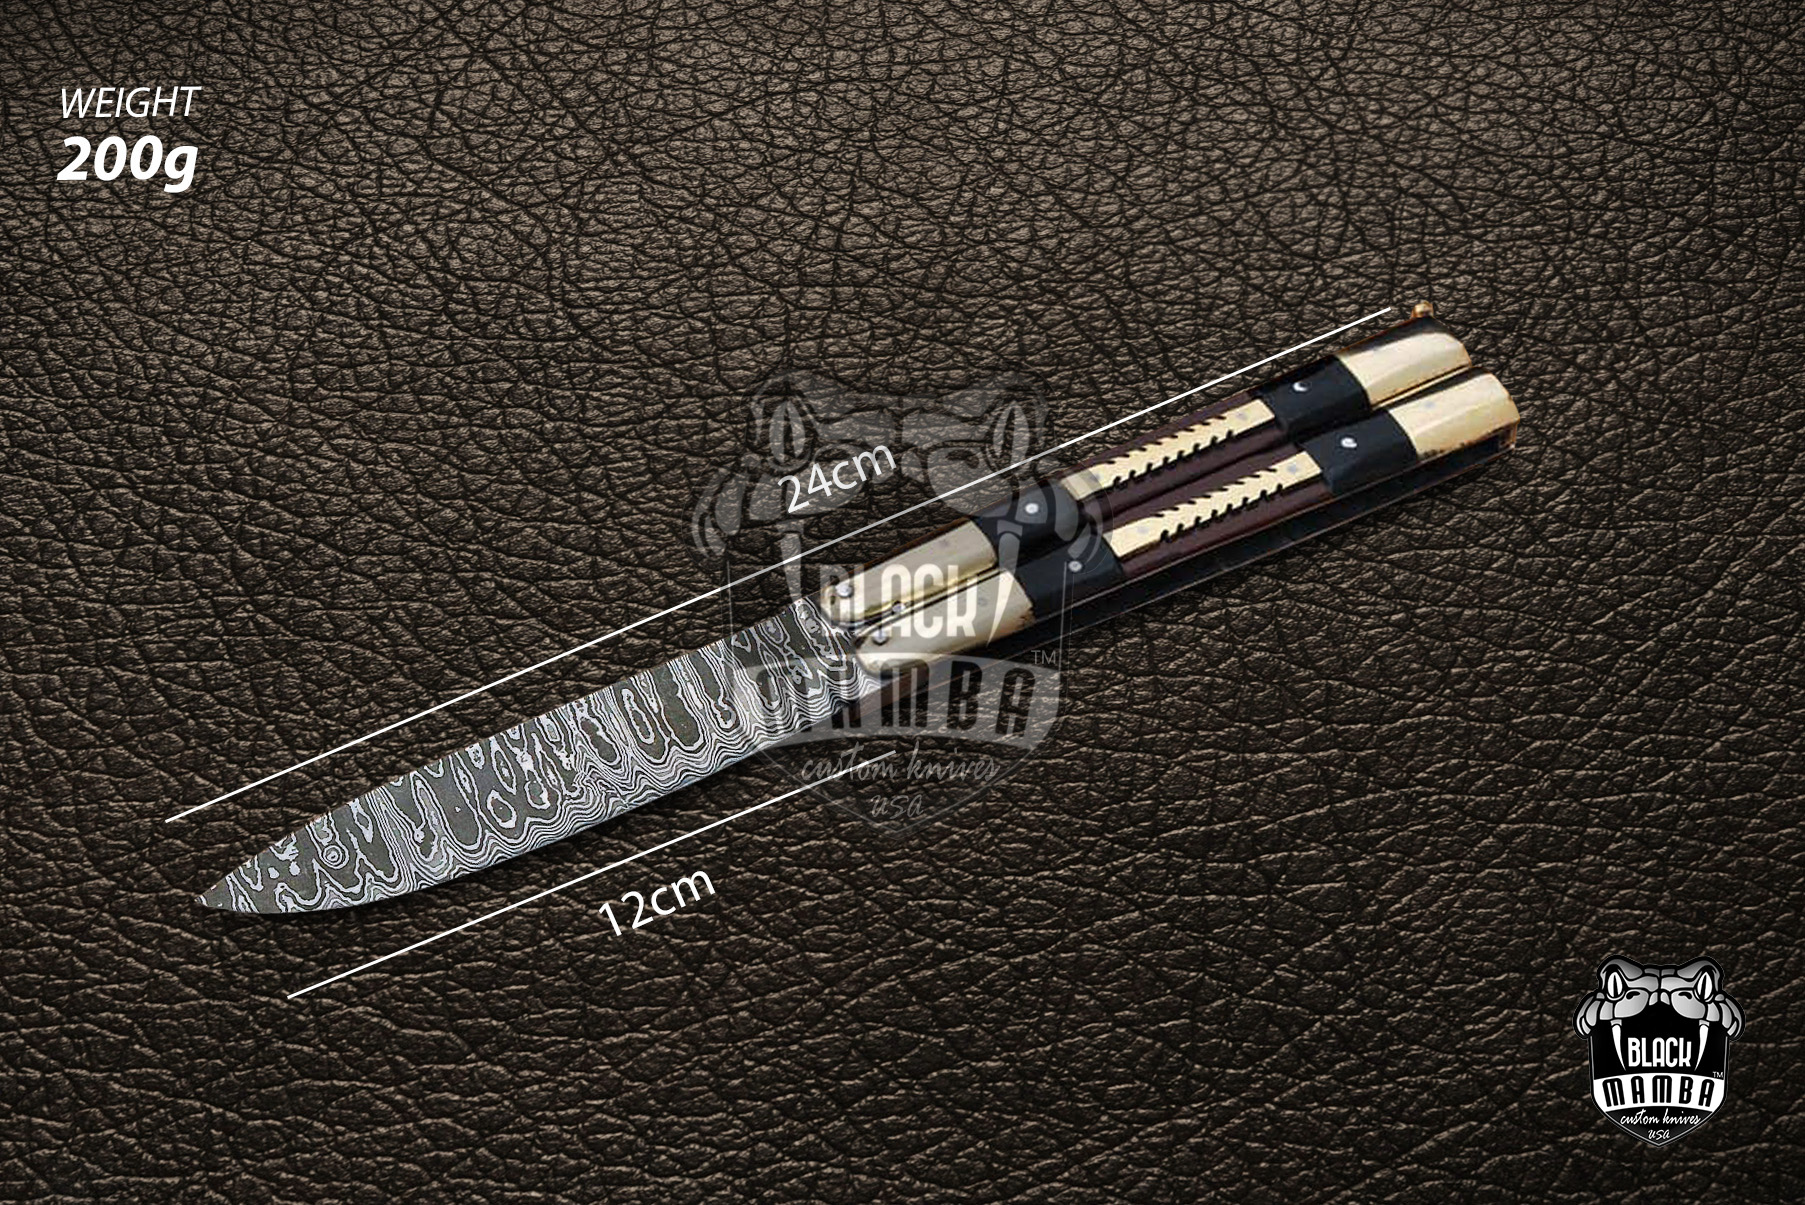 BMK-530 Damascus Balisong Butterfly Knife Engraved Handle